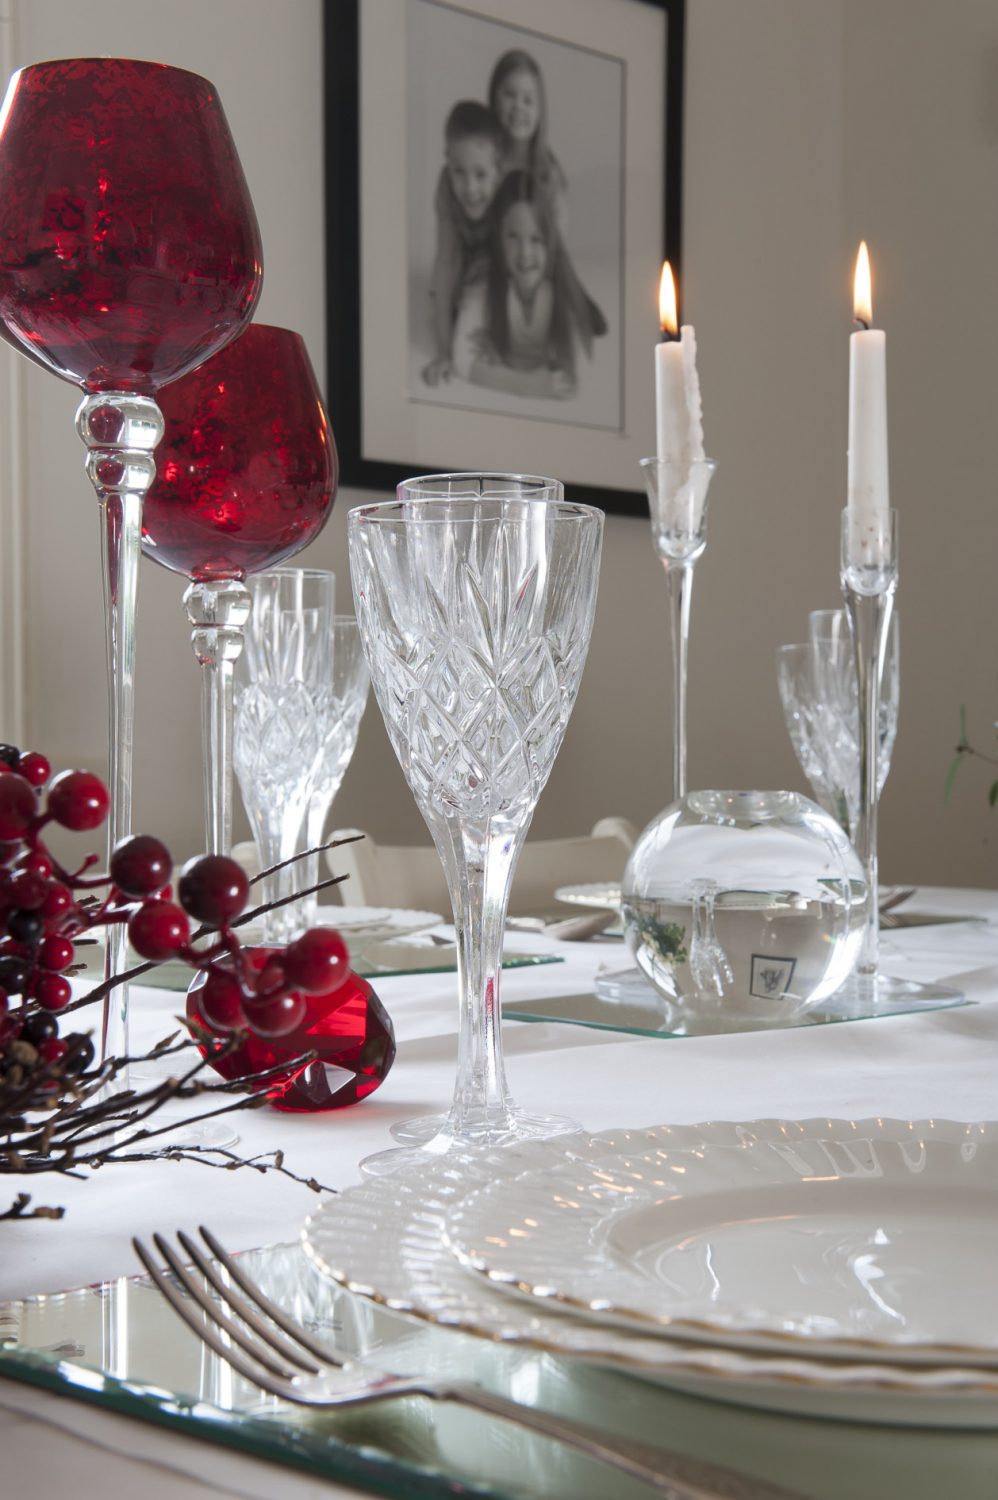 Steph and her friend Nicky have dressed the dining table with cut crystal glasses and cranberry glass goblets